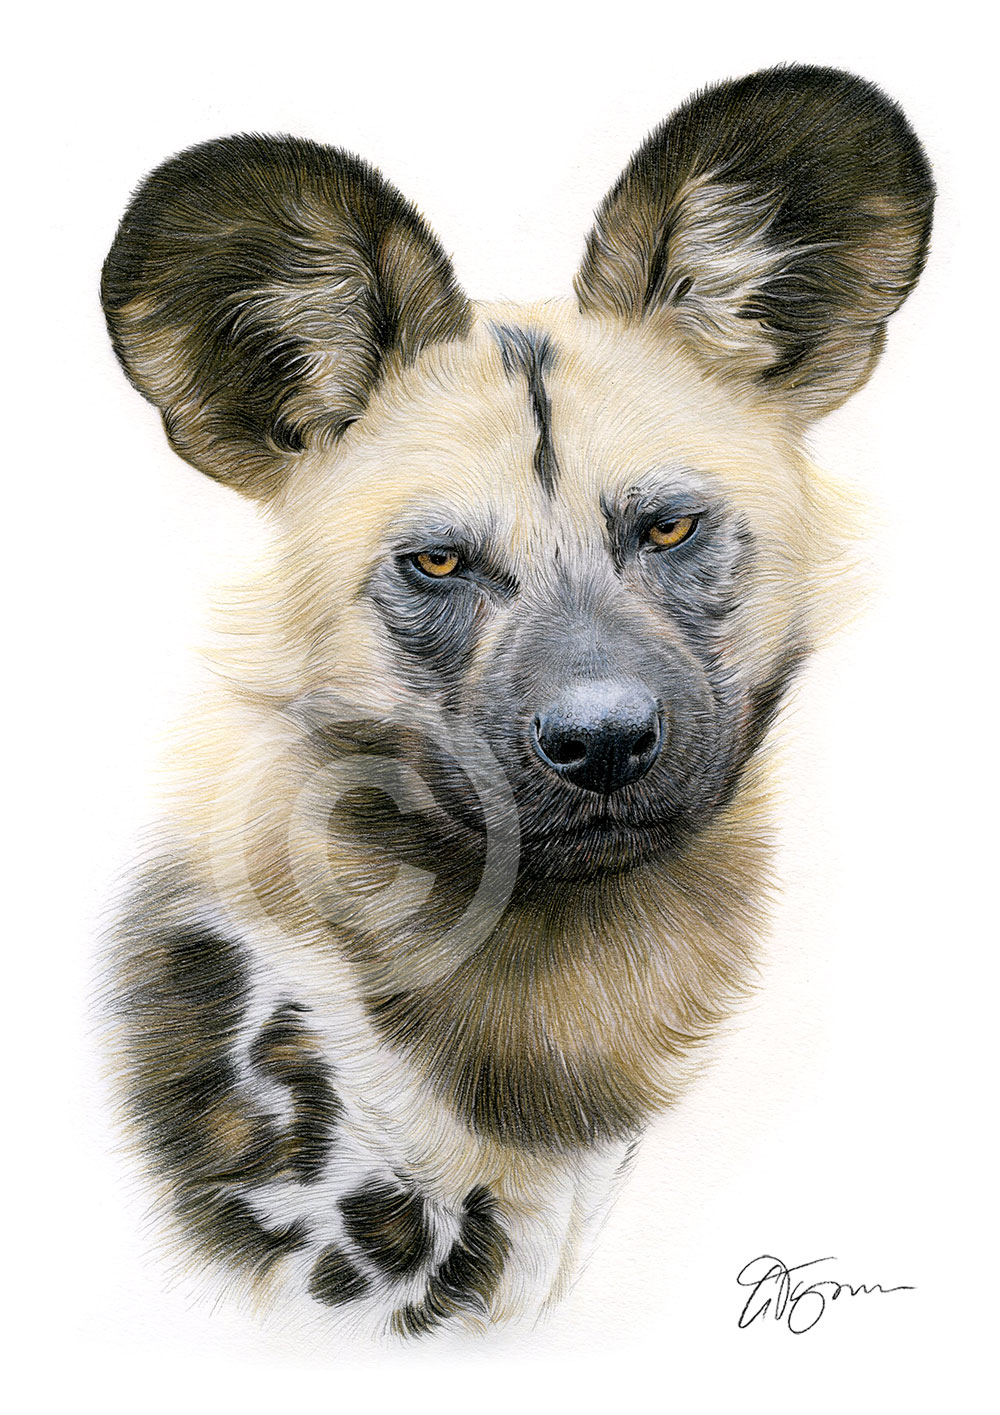 Colour pencil drawing of an African wild dog by artist Gary Tymon